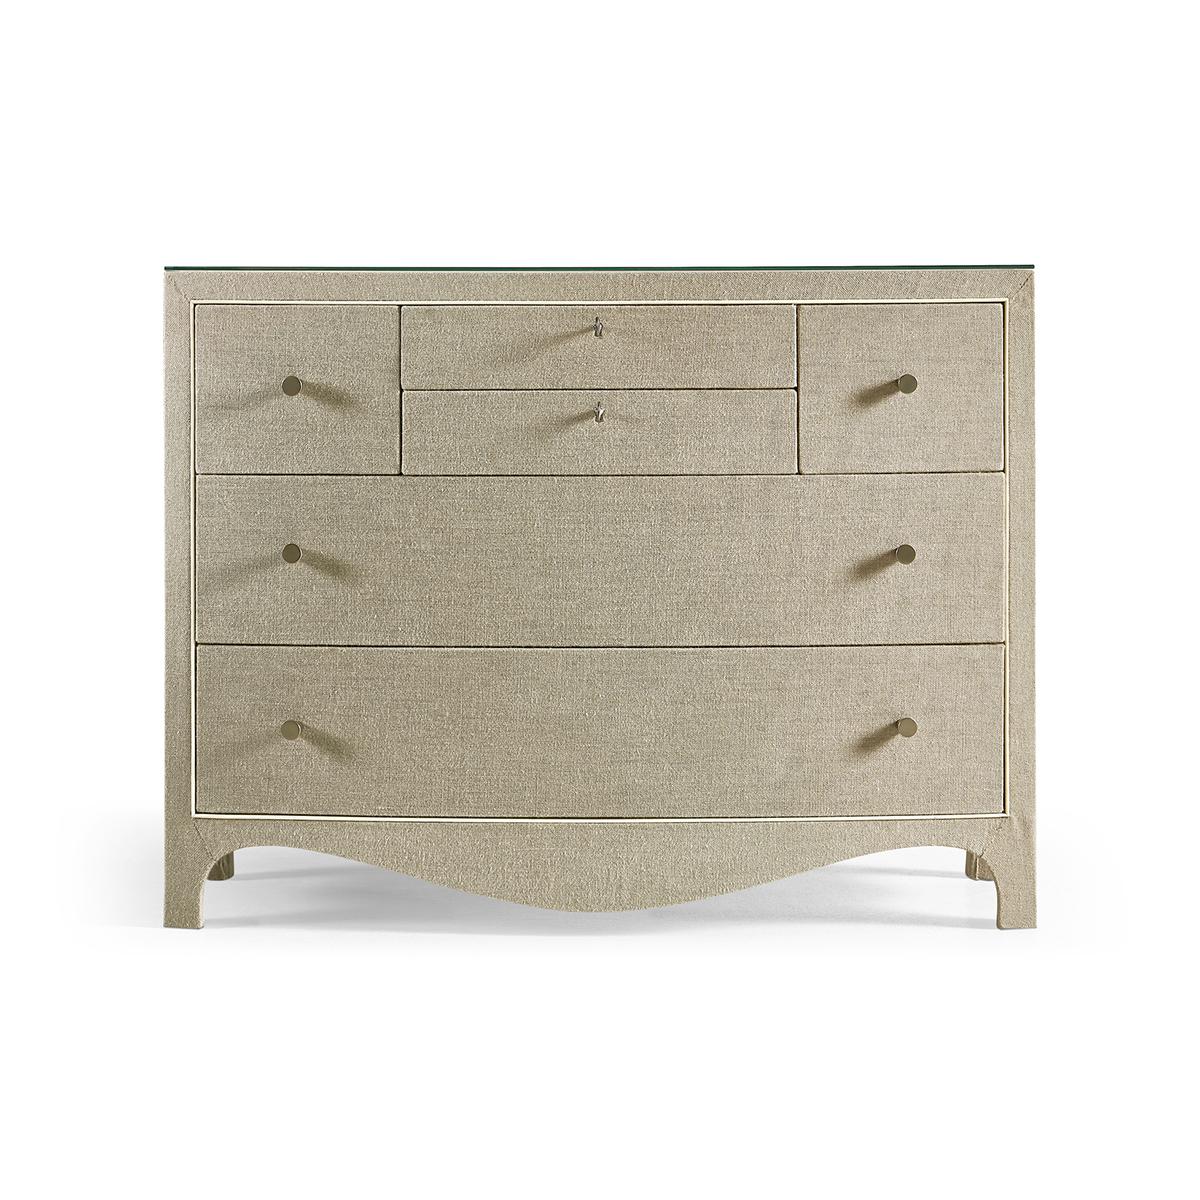 Linen wrapped Georgian chest, equally suited as a nightstand or hall chest, the chest imparts a classic form wrapped in Kravet performance linen to the top and case front. Impeccable design standards include a decorative tassel on the top middle